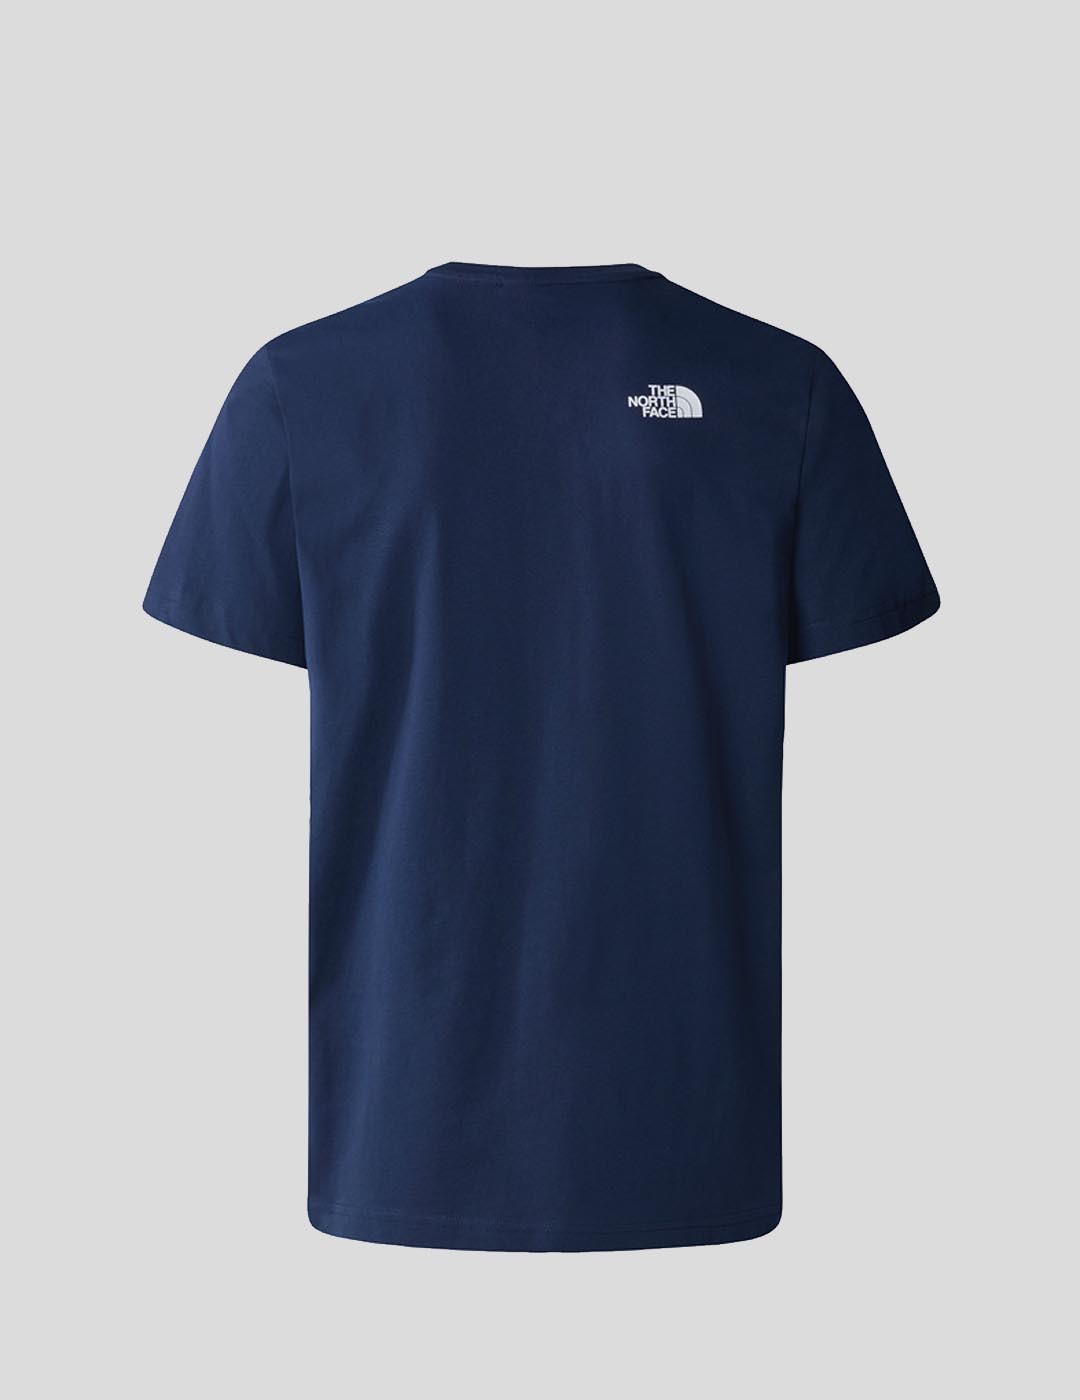 CAMISETA THE NORTH FACE WOODCUT DOME TEE  SUMMIT NAVY